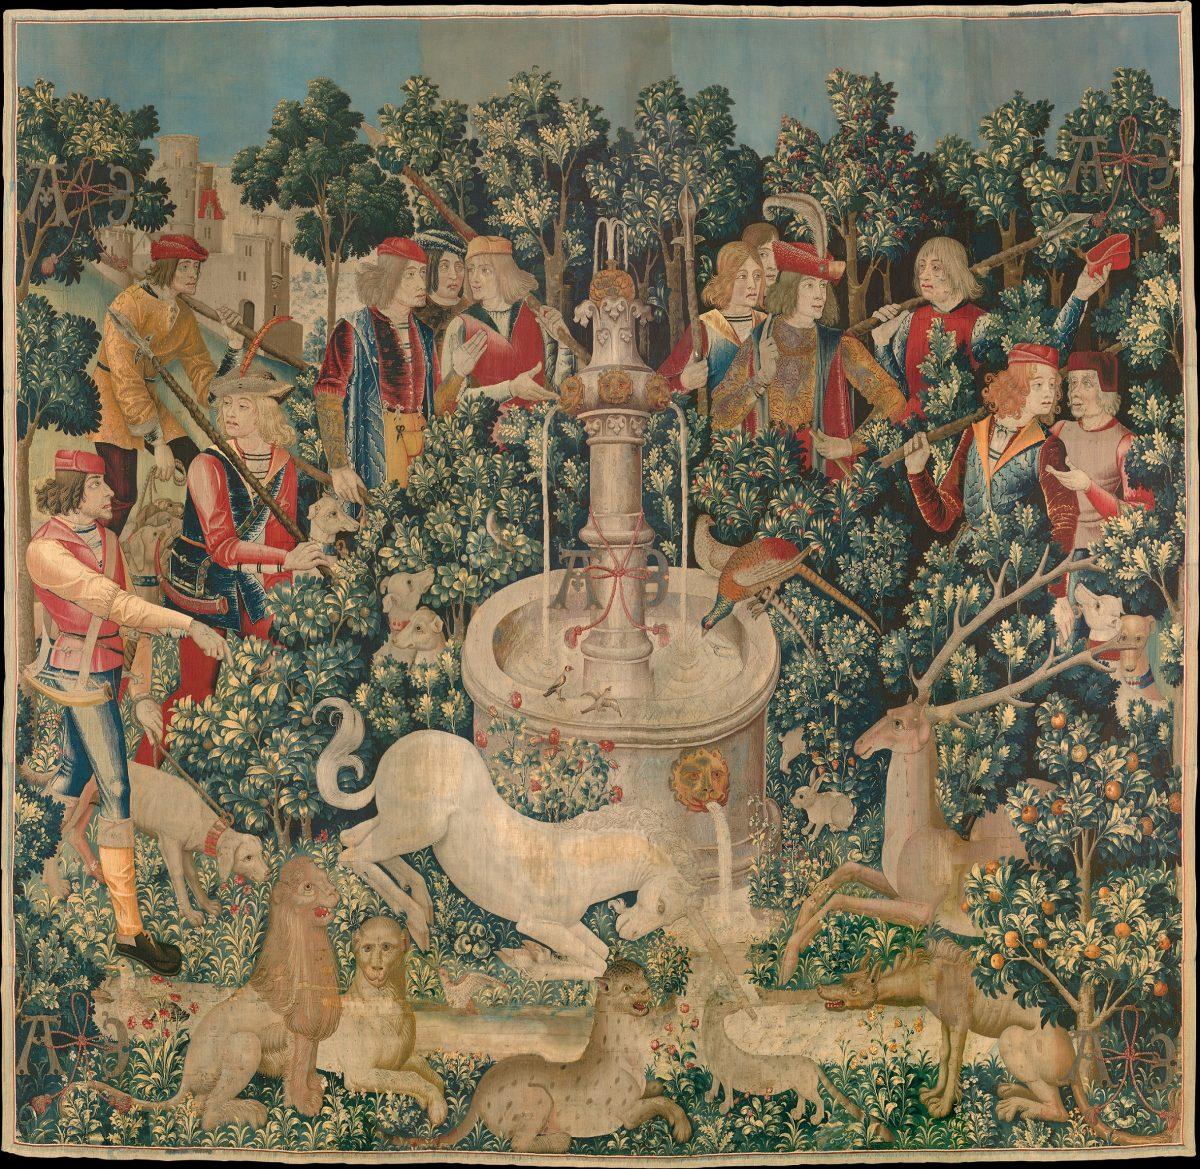 “The Unicorn Is Found,” 1495–1505, South Netherlandish. Wool warp with wool, silk, silver, and gilt wefts; 145 inches by 149 inches. Gift of John D. Rockefeller Jr., 1937, The Met Cloisters. (The Metropolitan Museum of Art )